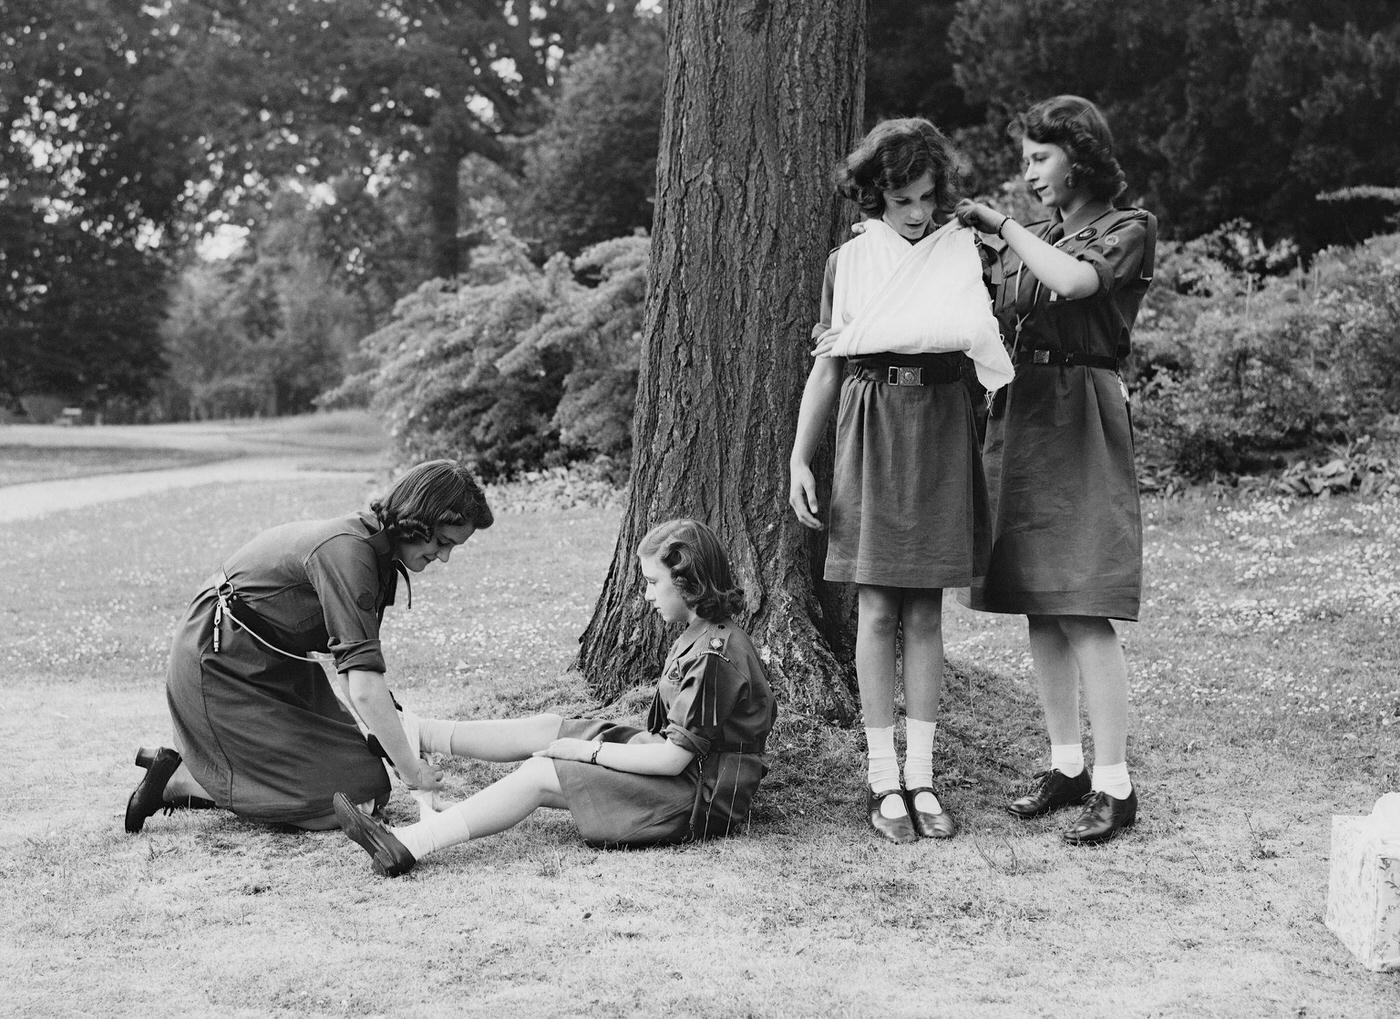 Princess Elizabeth places a young girl's arm in a sling as part of the girl guides in Frogmore, Windsor, England on April 11, 1942.